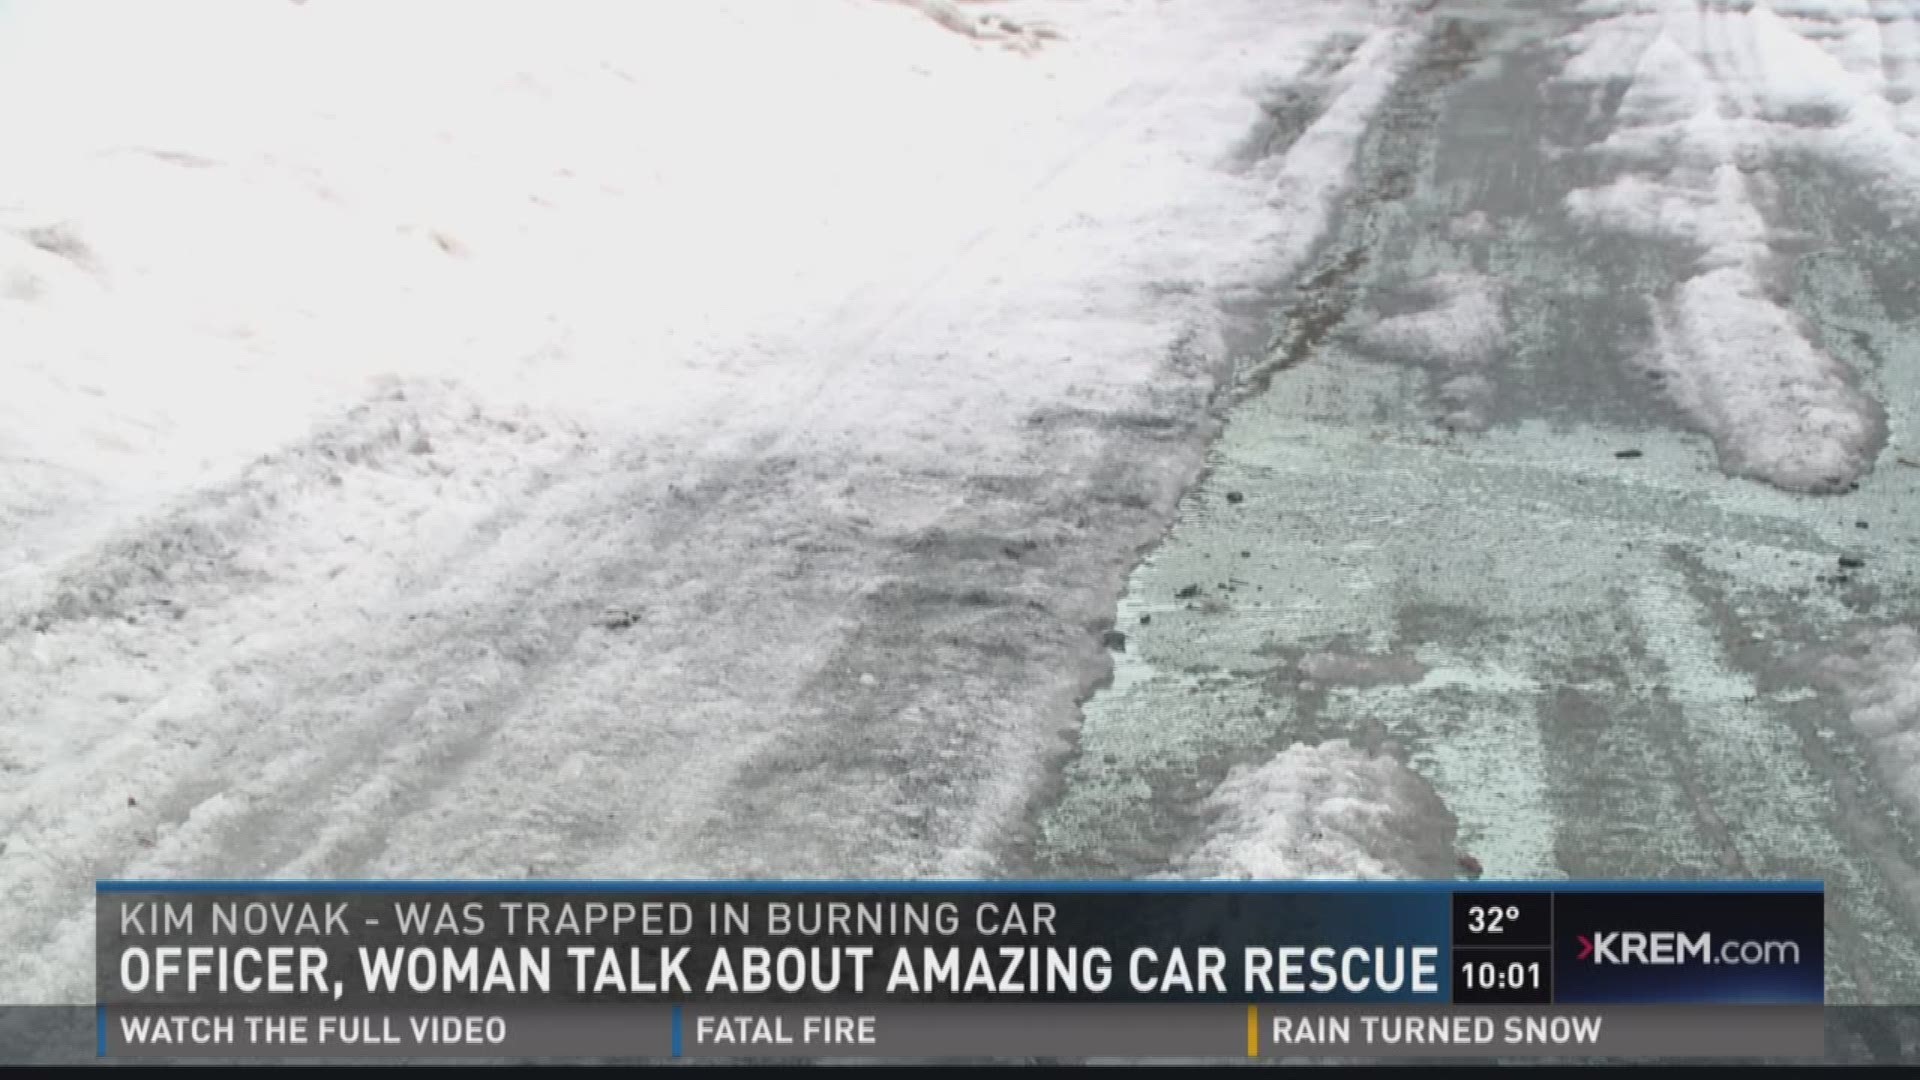 Officer, woman talk about amazing car rescue